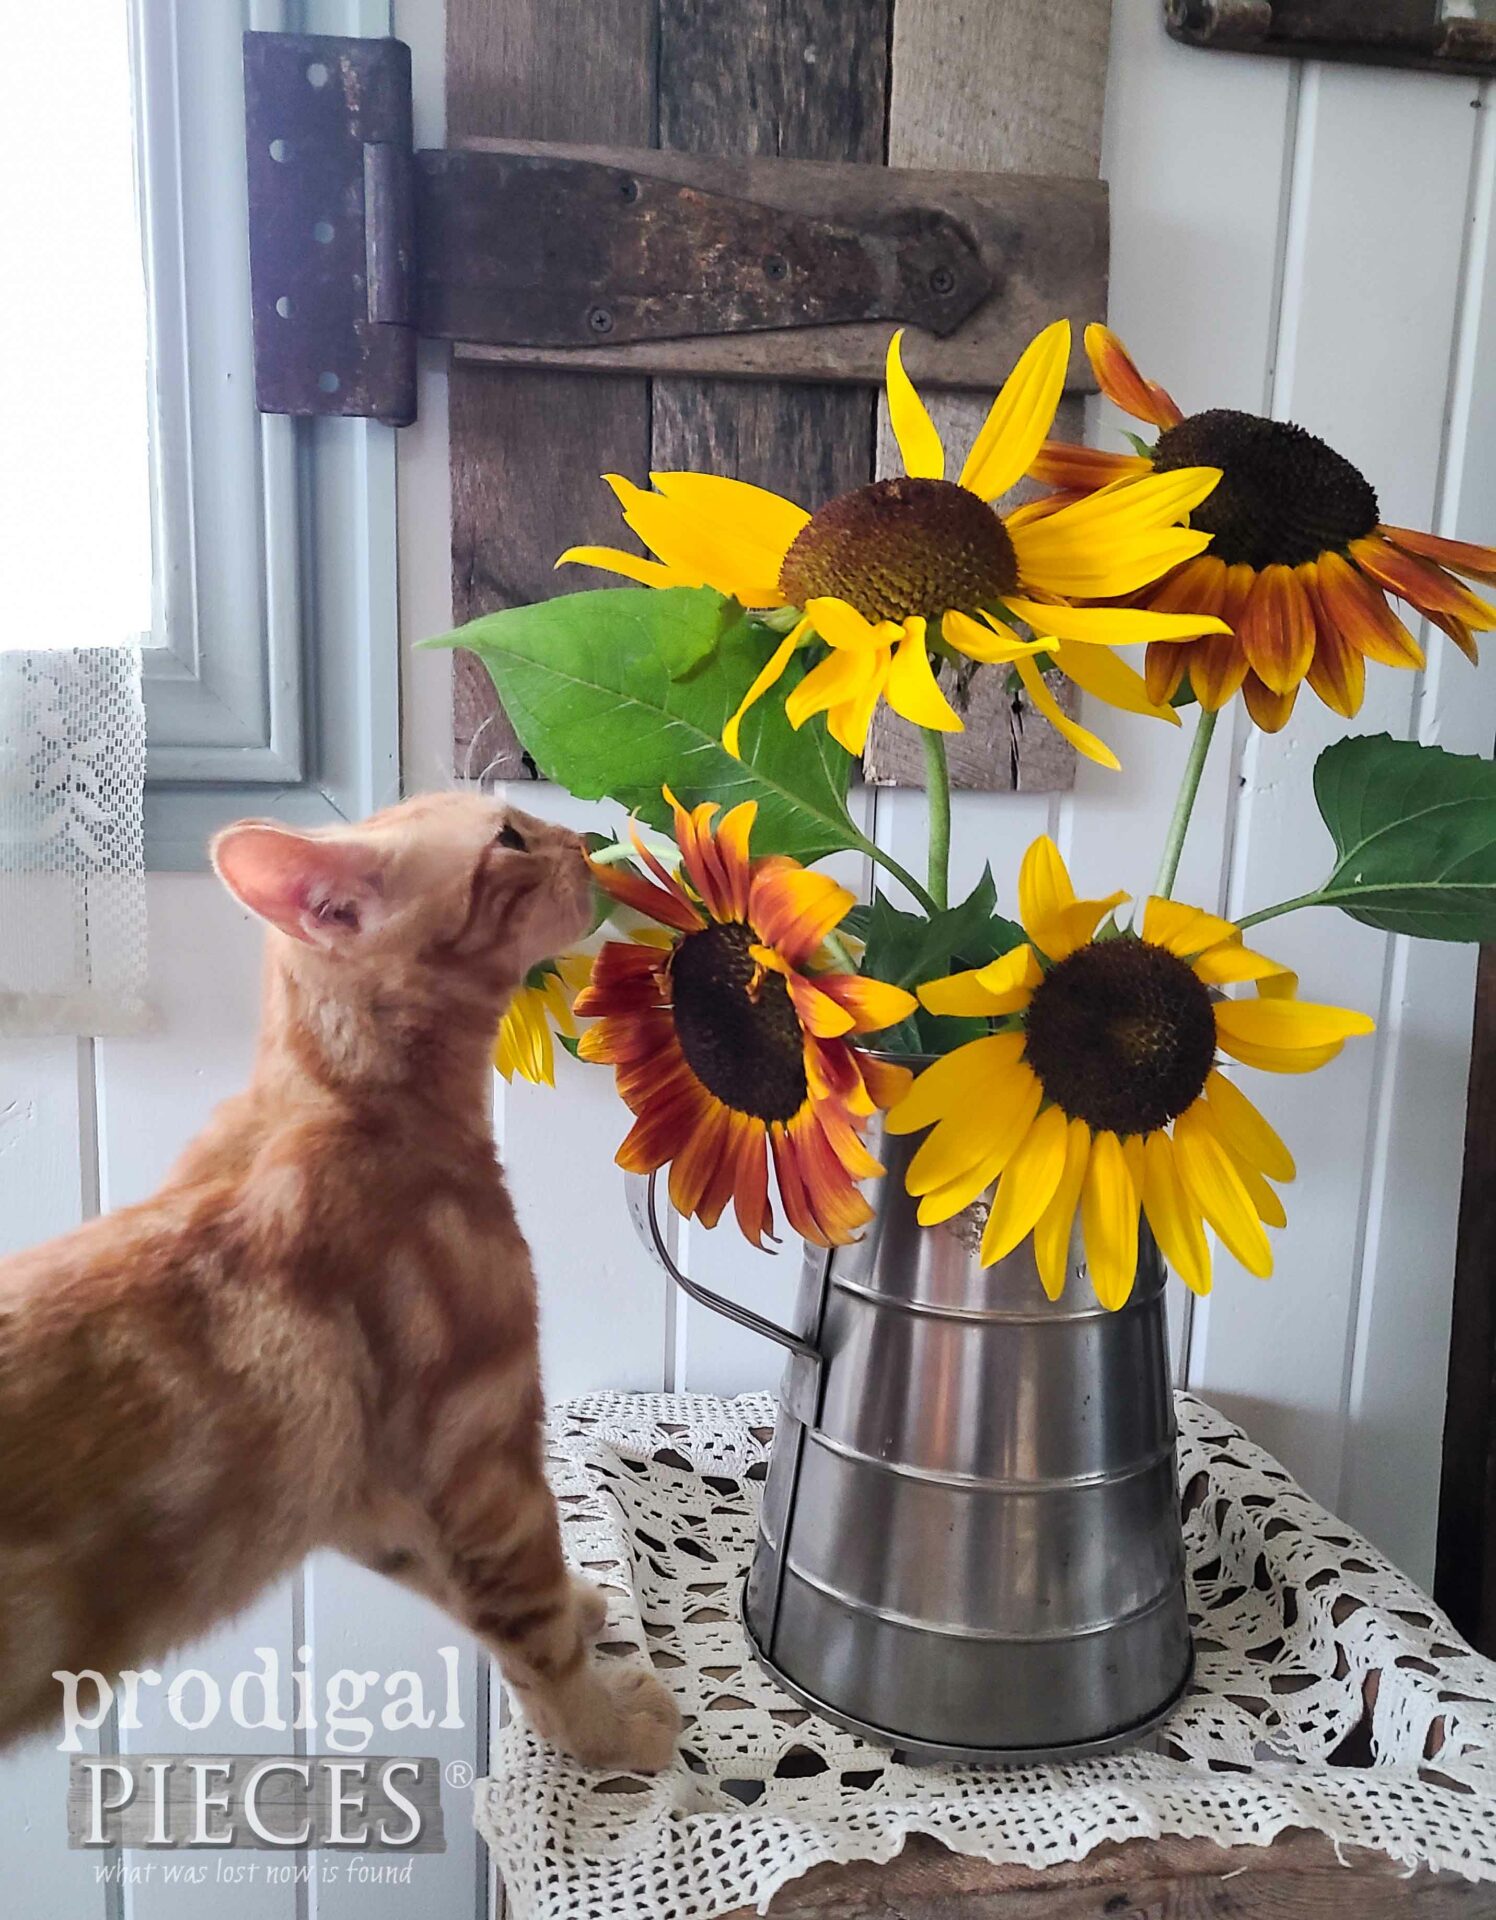 Ivan the Tiger Kitten Smelling Sunflowers by Larissa of Prodigal Pieces | prodigalpieces.com #prodigalpieces